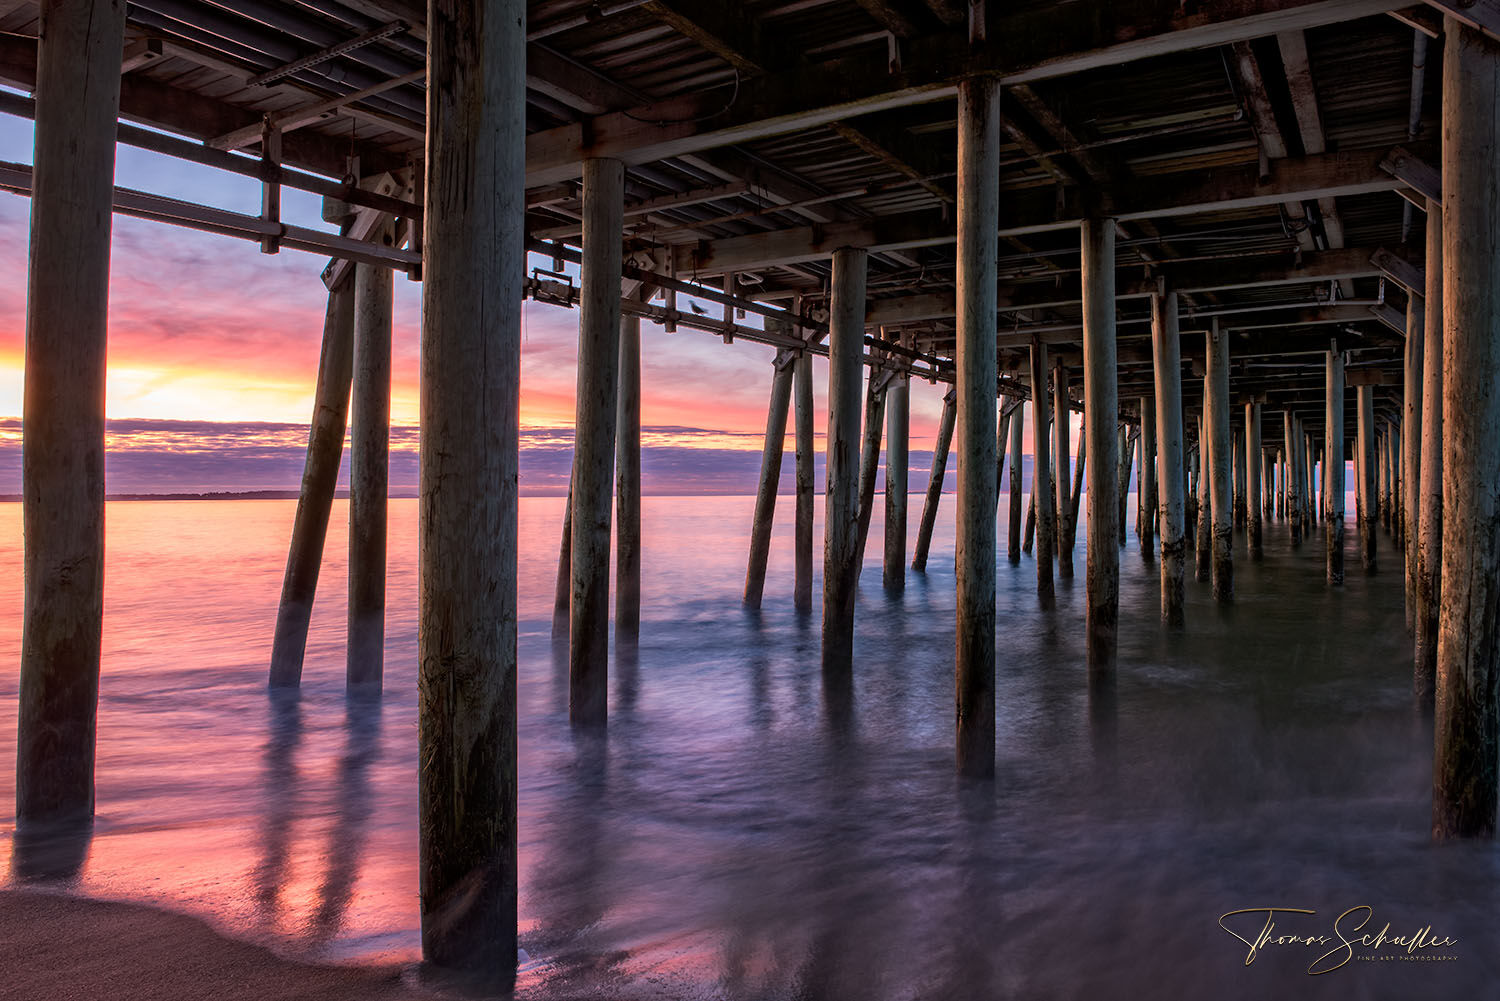 A Vivid Sunrise viewed from under the piers of Old Orchard Beach Maine | Limited Edition seascape fine art prints for sale